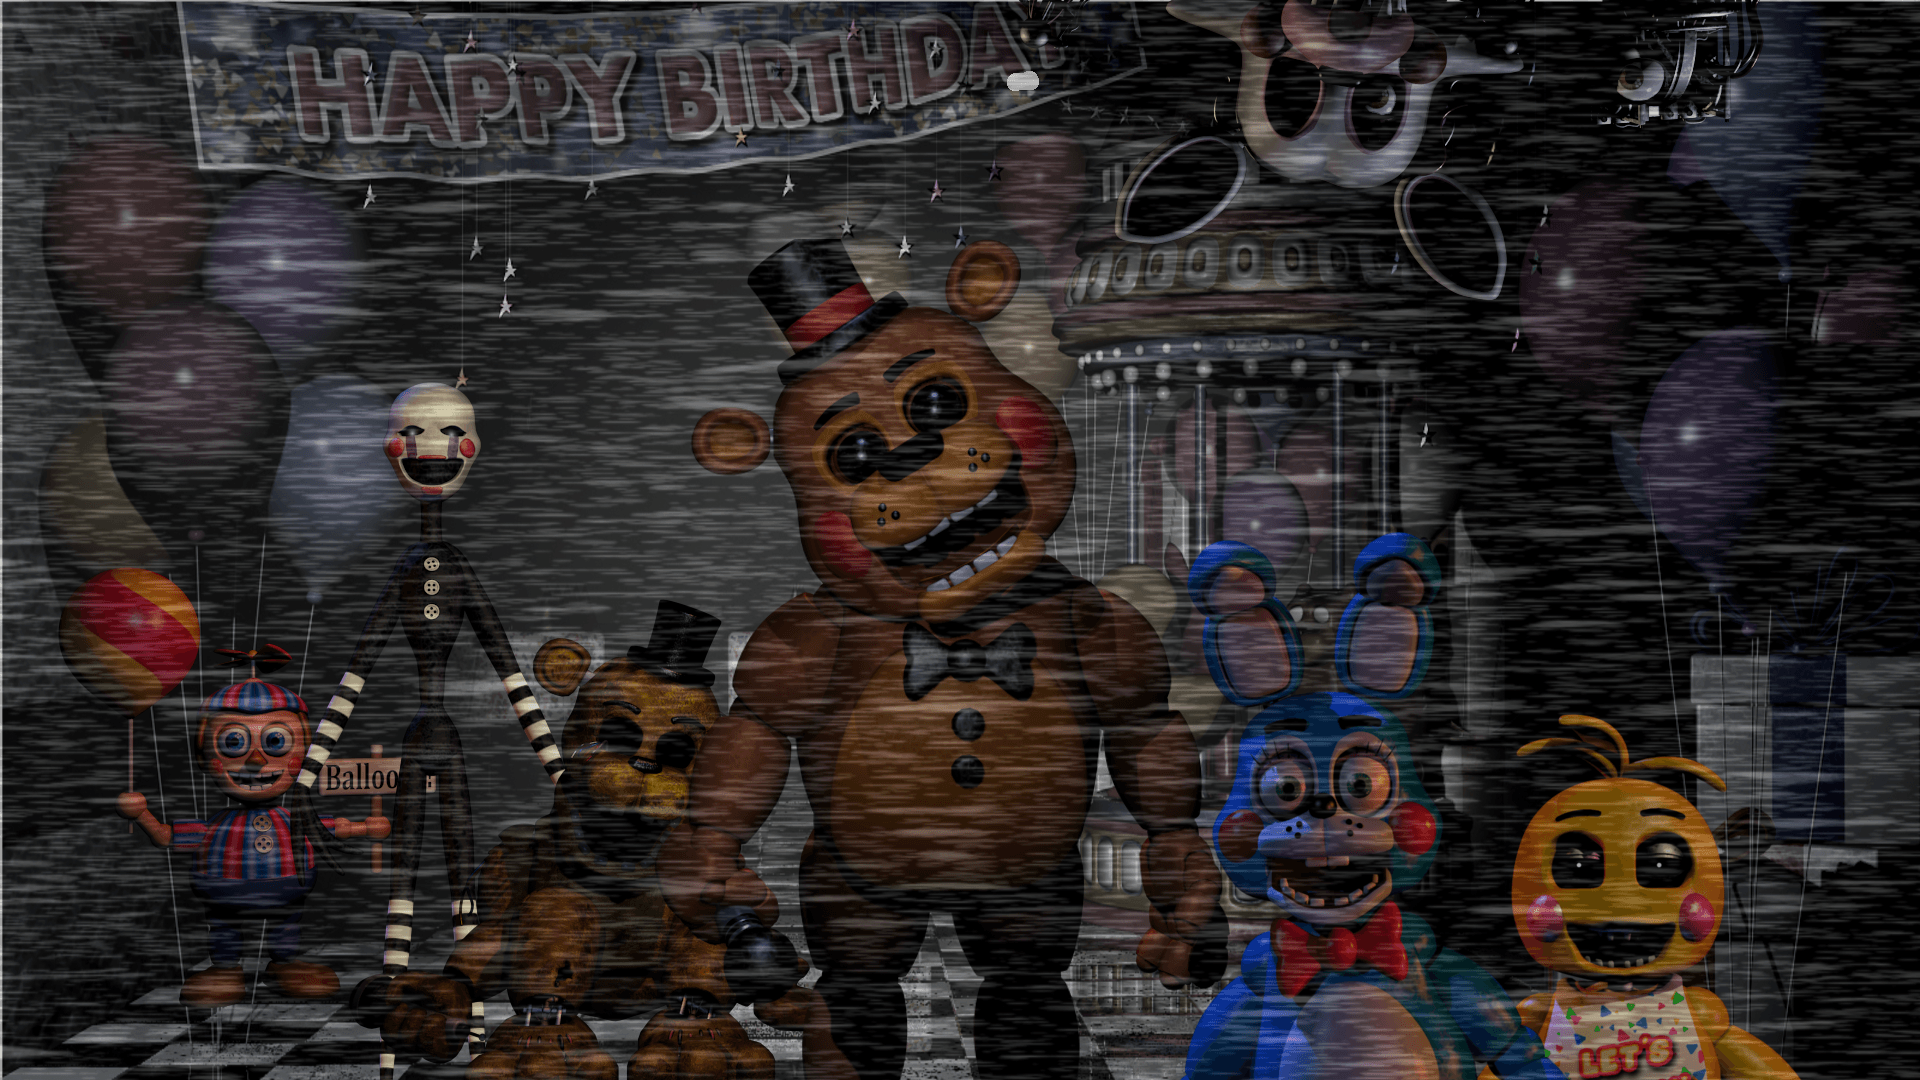 Fnaf 2 wallpaper for ipod/iphone/etc  Five nights at freddy's, Five  night, Freddy